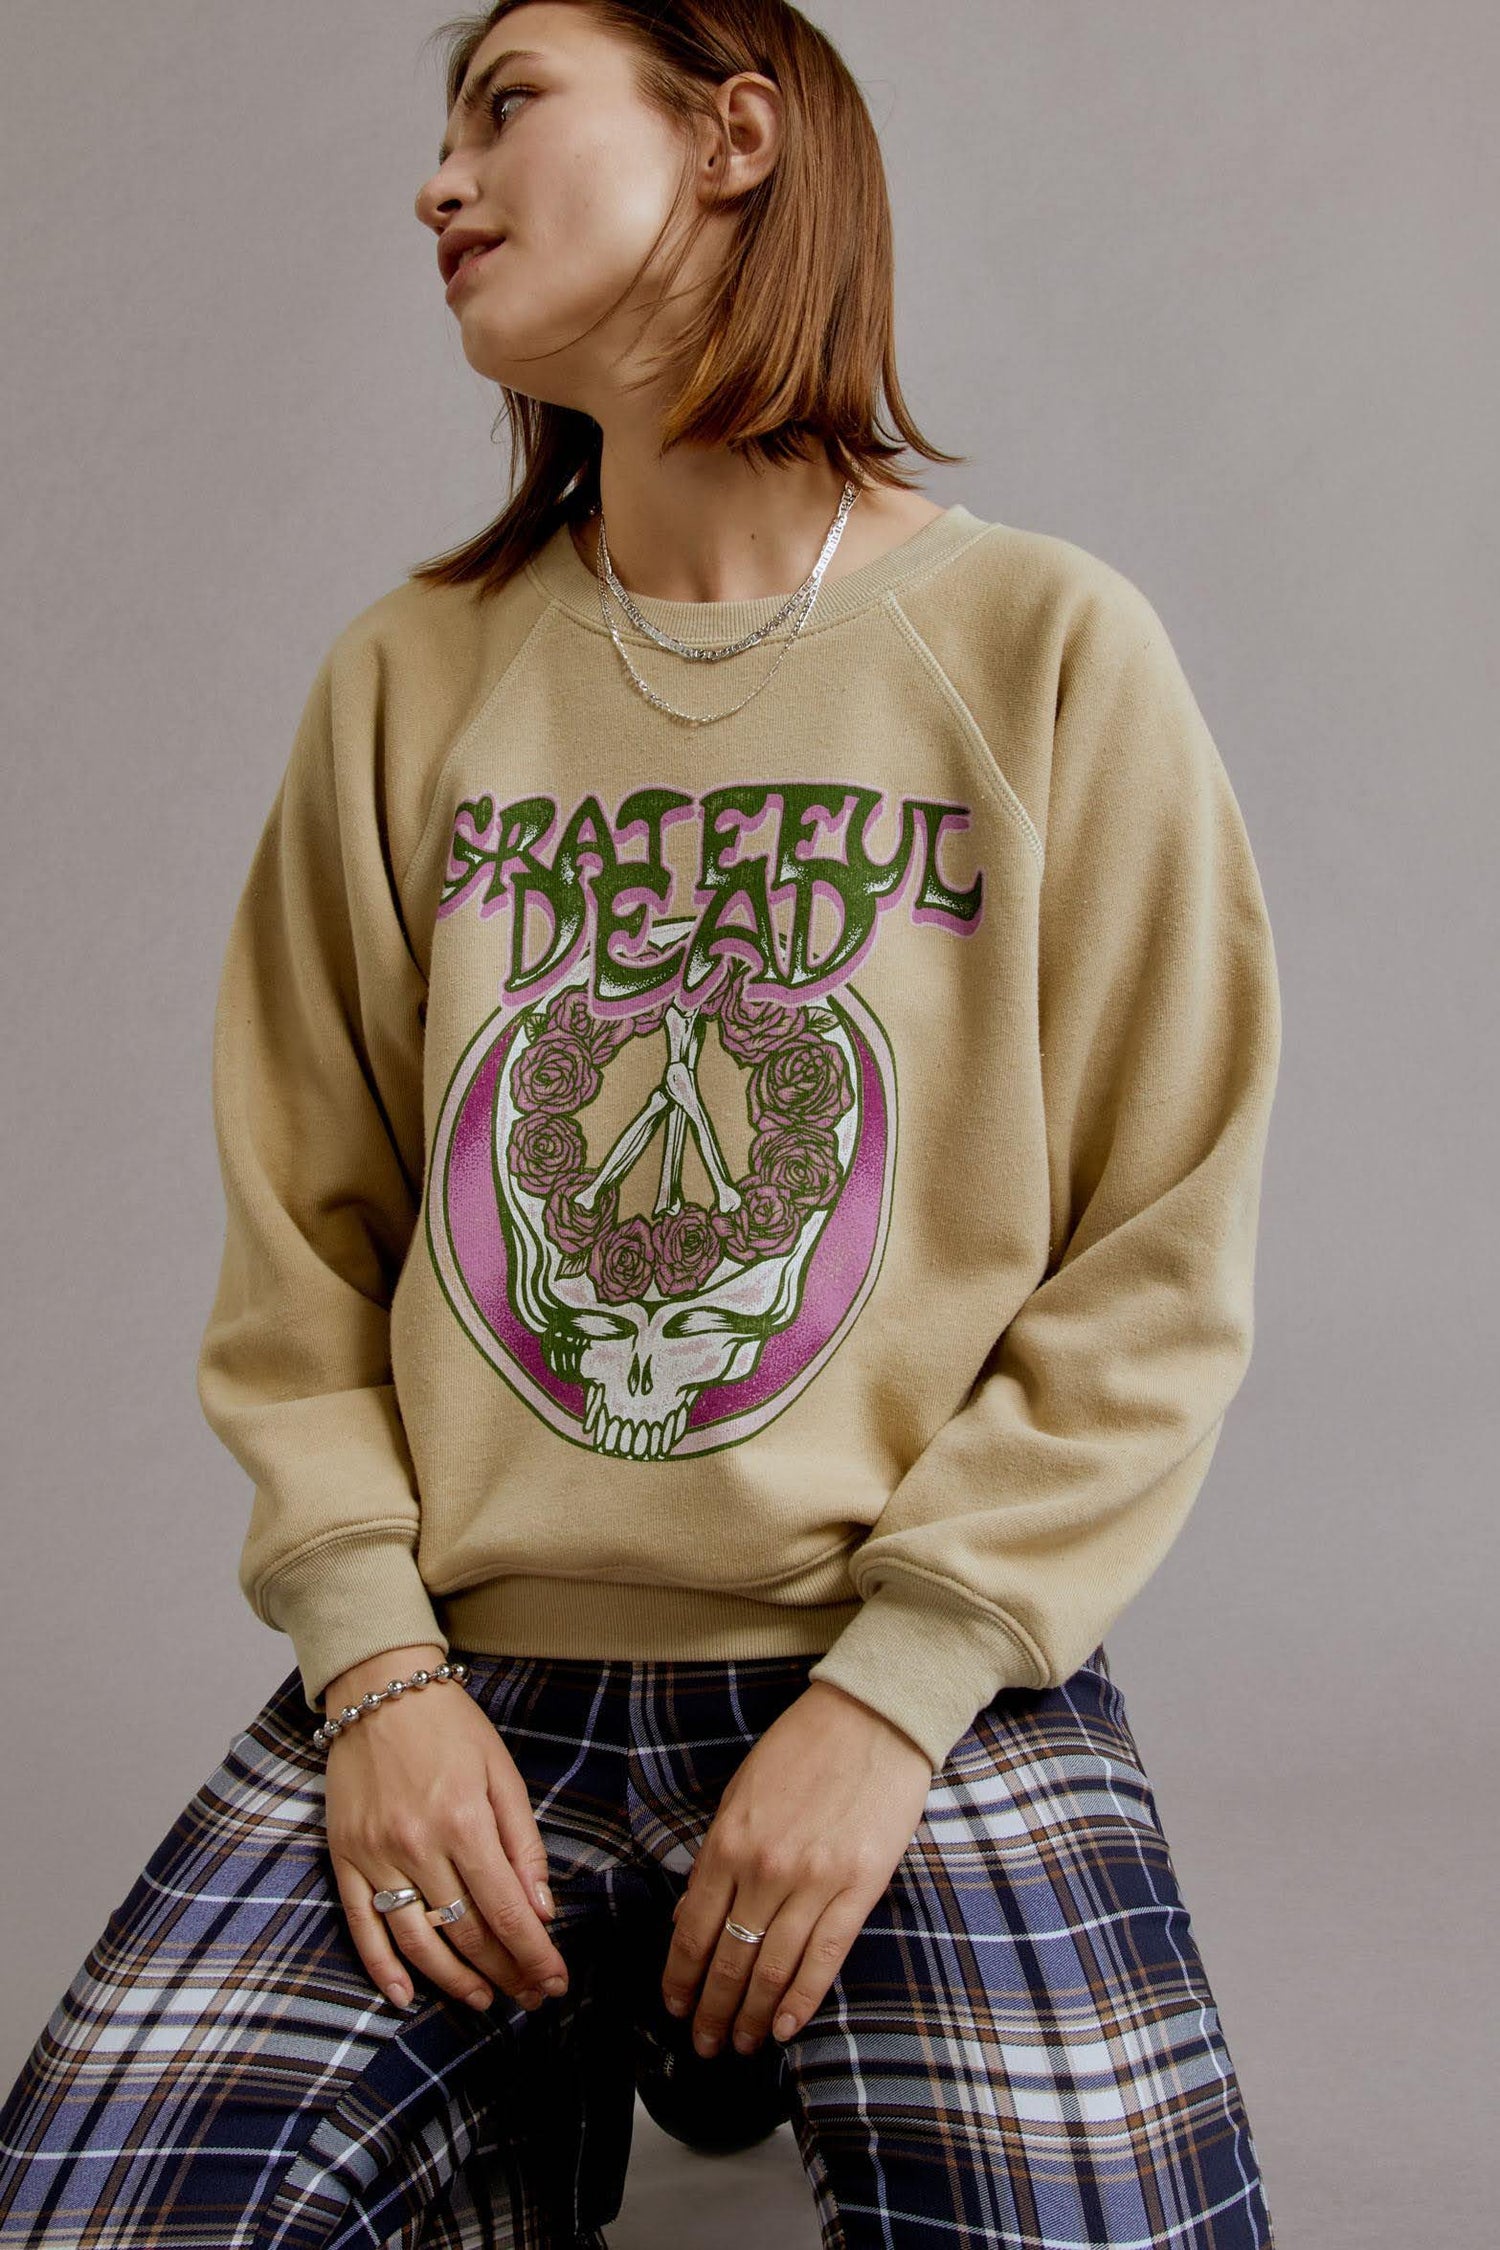 A brown-haired model wearing a khaki tee featuring a hand-drawn rendition of a skull and roses graphic is the lead focal point, accented with the group’s logo in trippy letters and a pop of pink